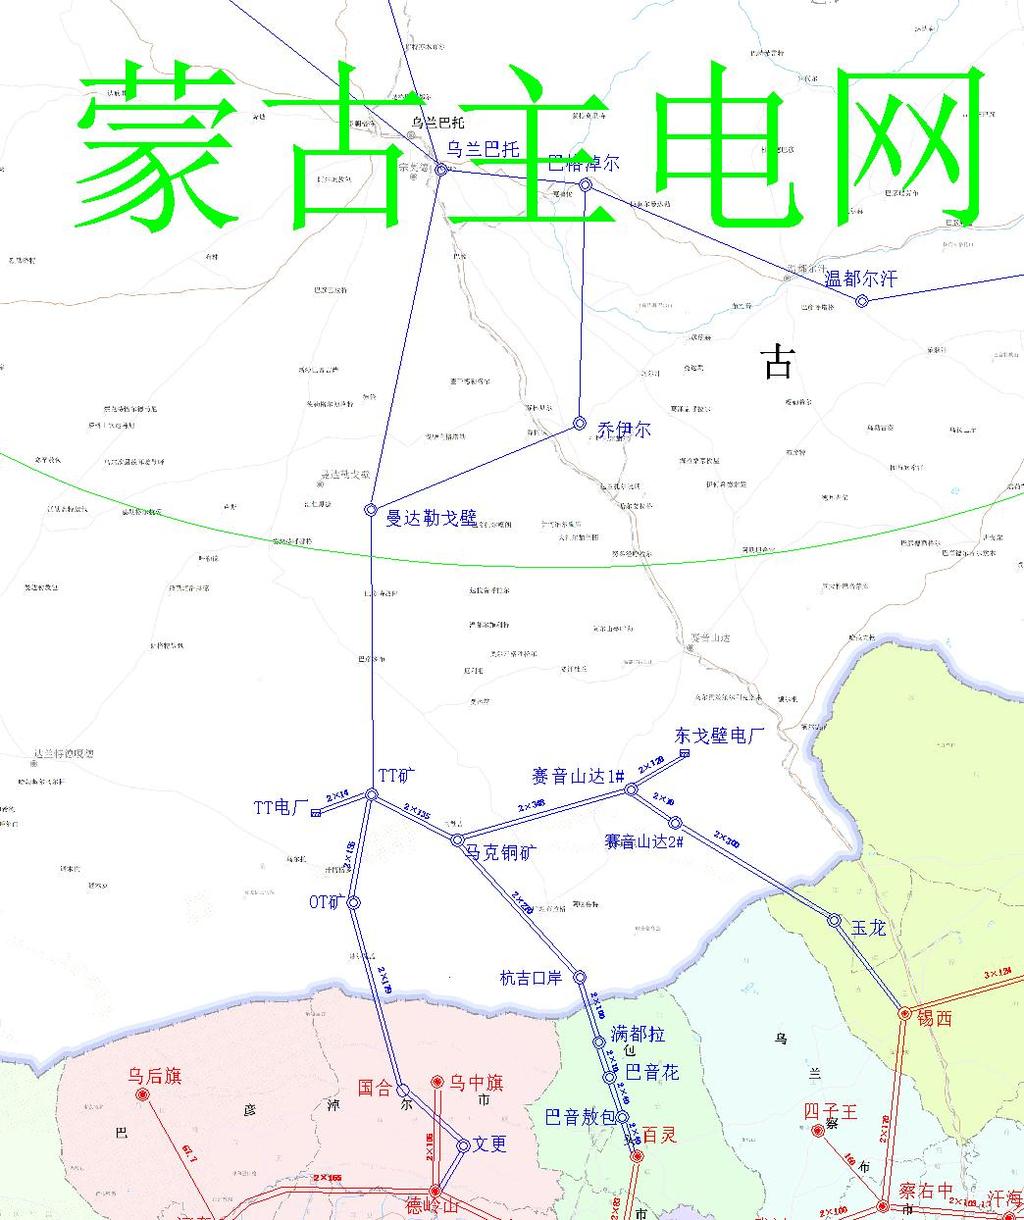 2.4 Interconnection plans Inner Mongolia grid and Mongolia grid